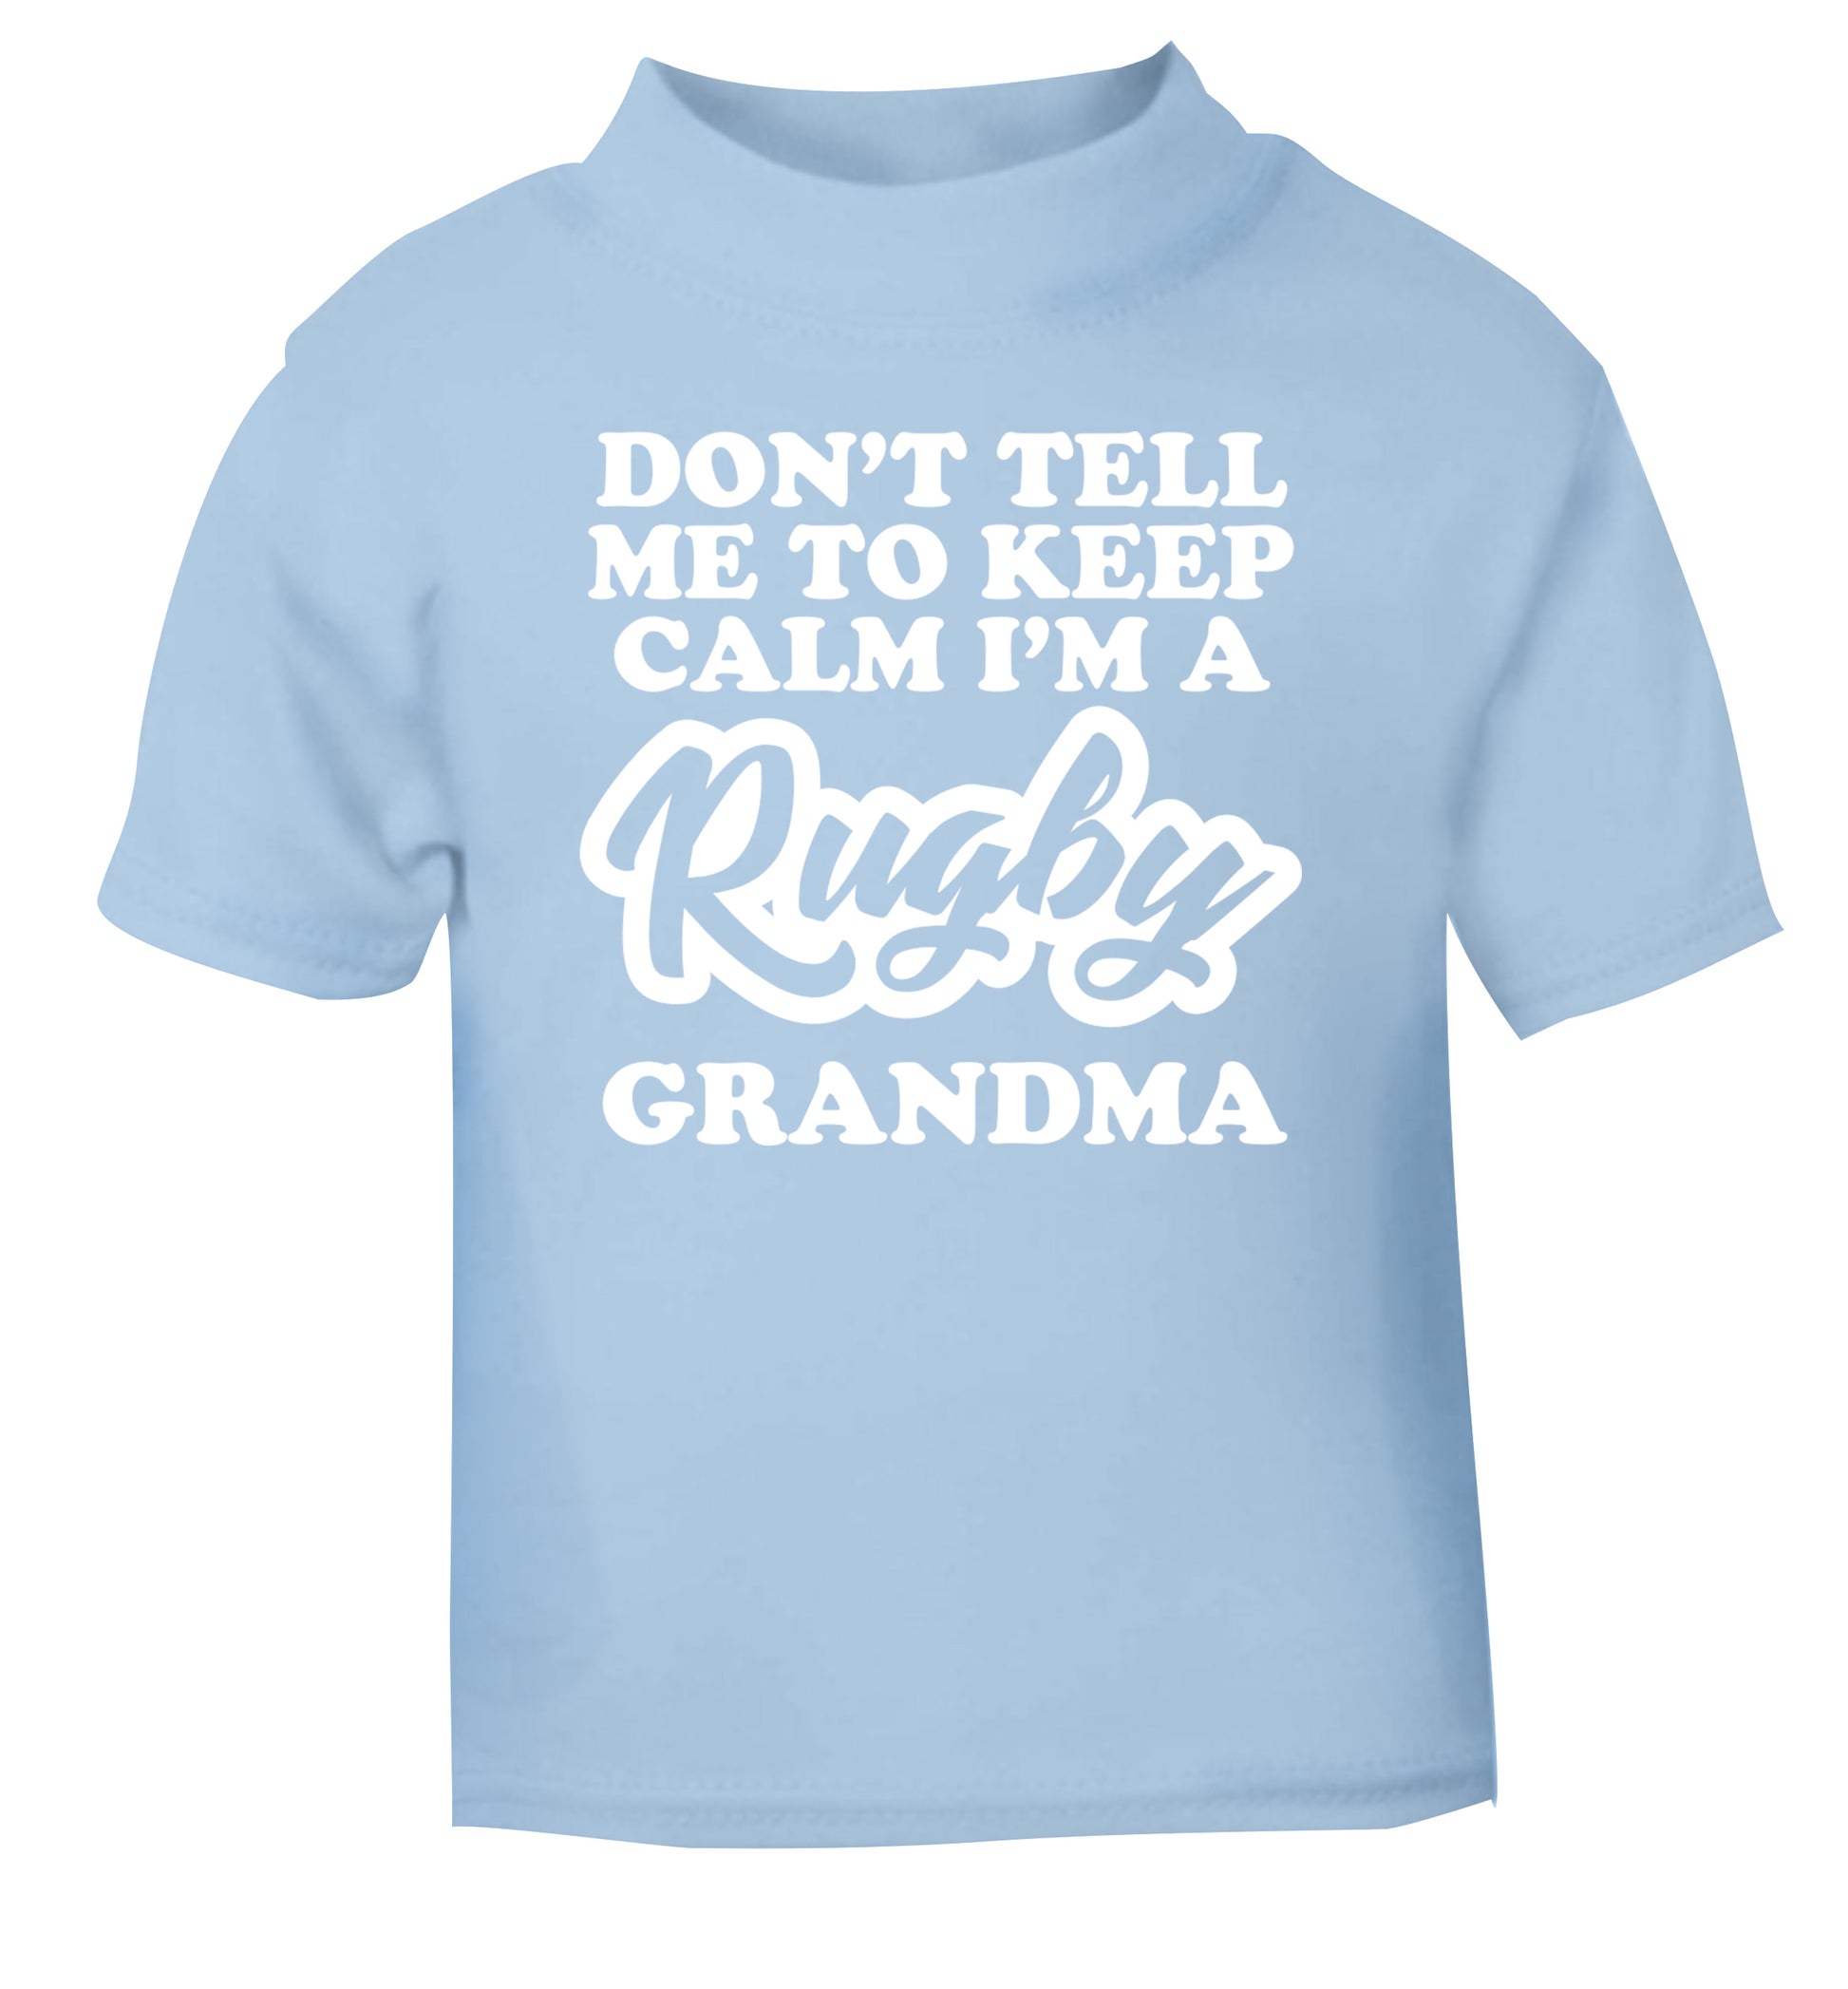 Don't tell me to keep calm I'm a rugby grandma light blue Baby Toddler Tshirt 2 Years